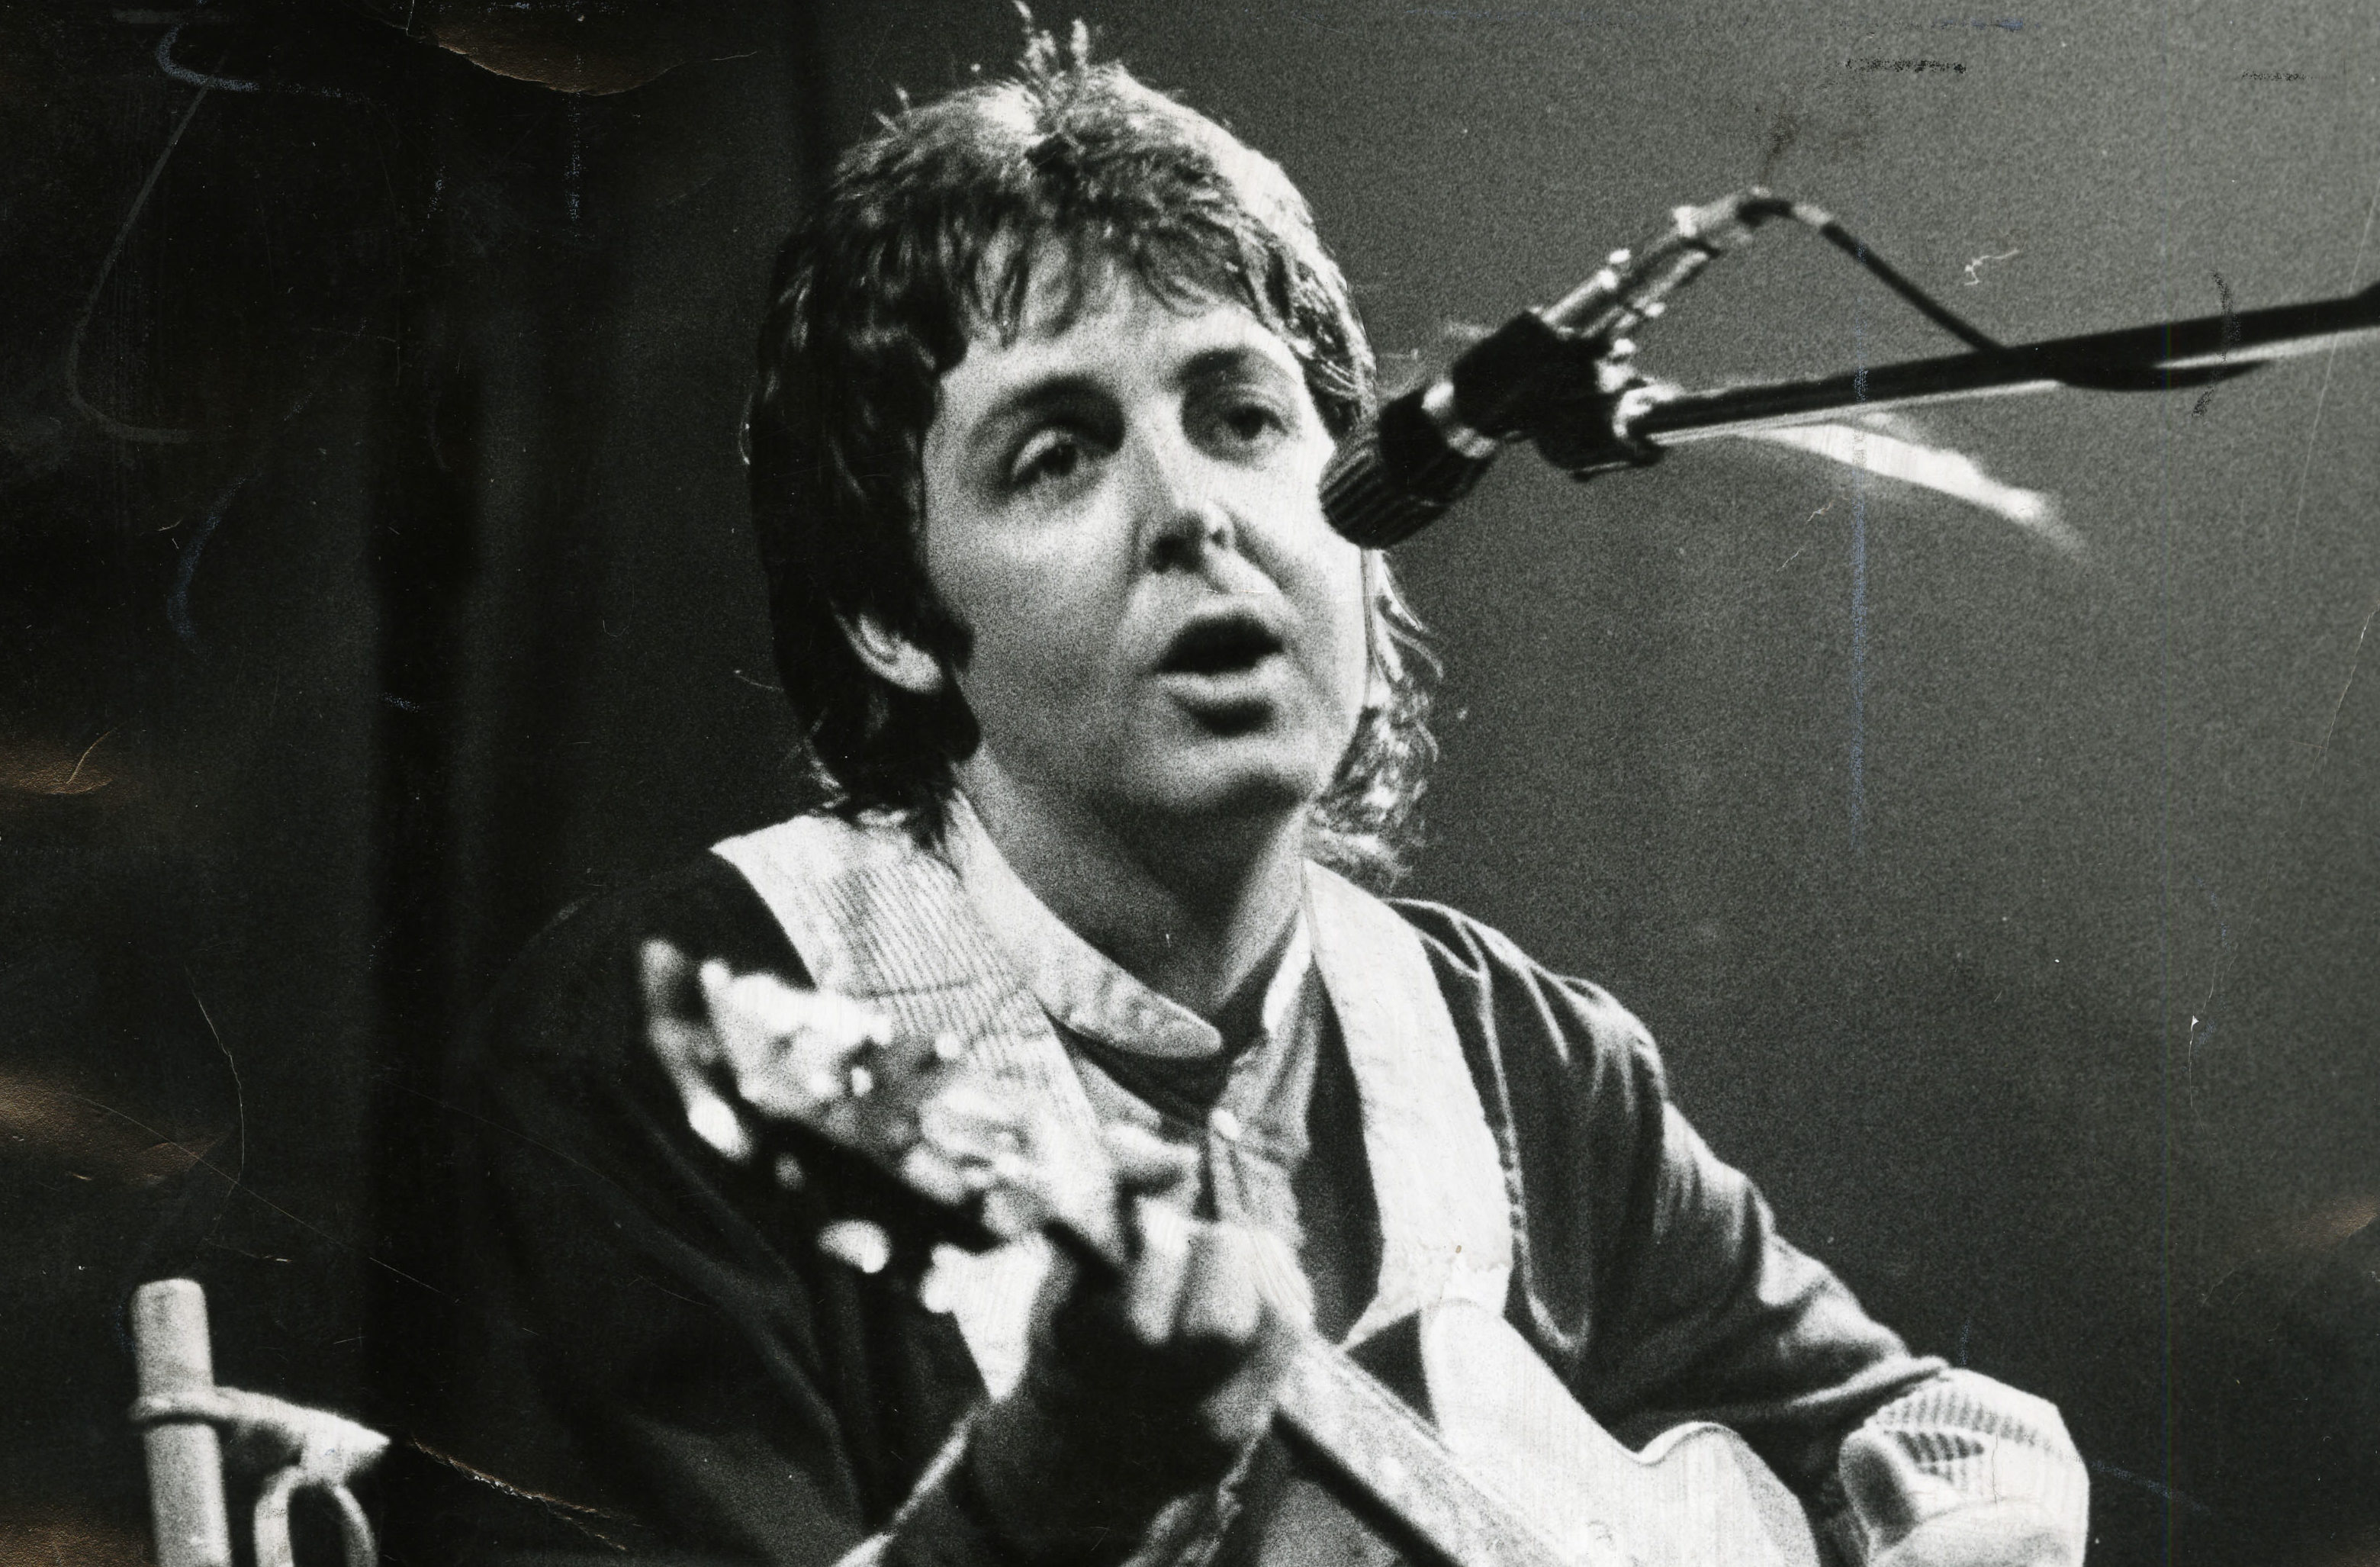 Paul McCartney performing in Dundee, 1975 (DC Thomson)